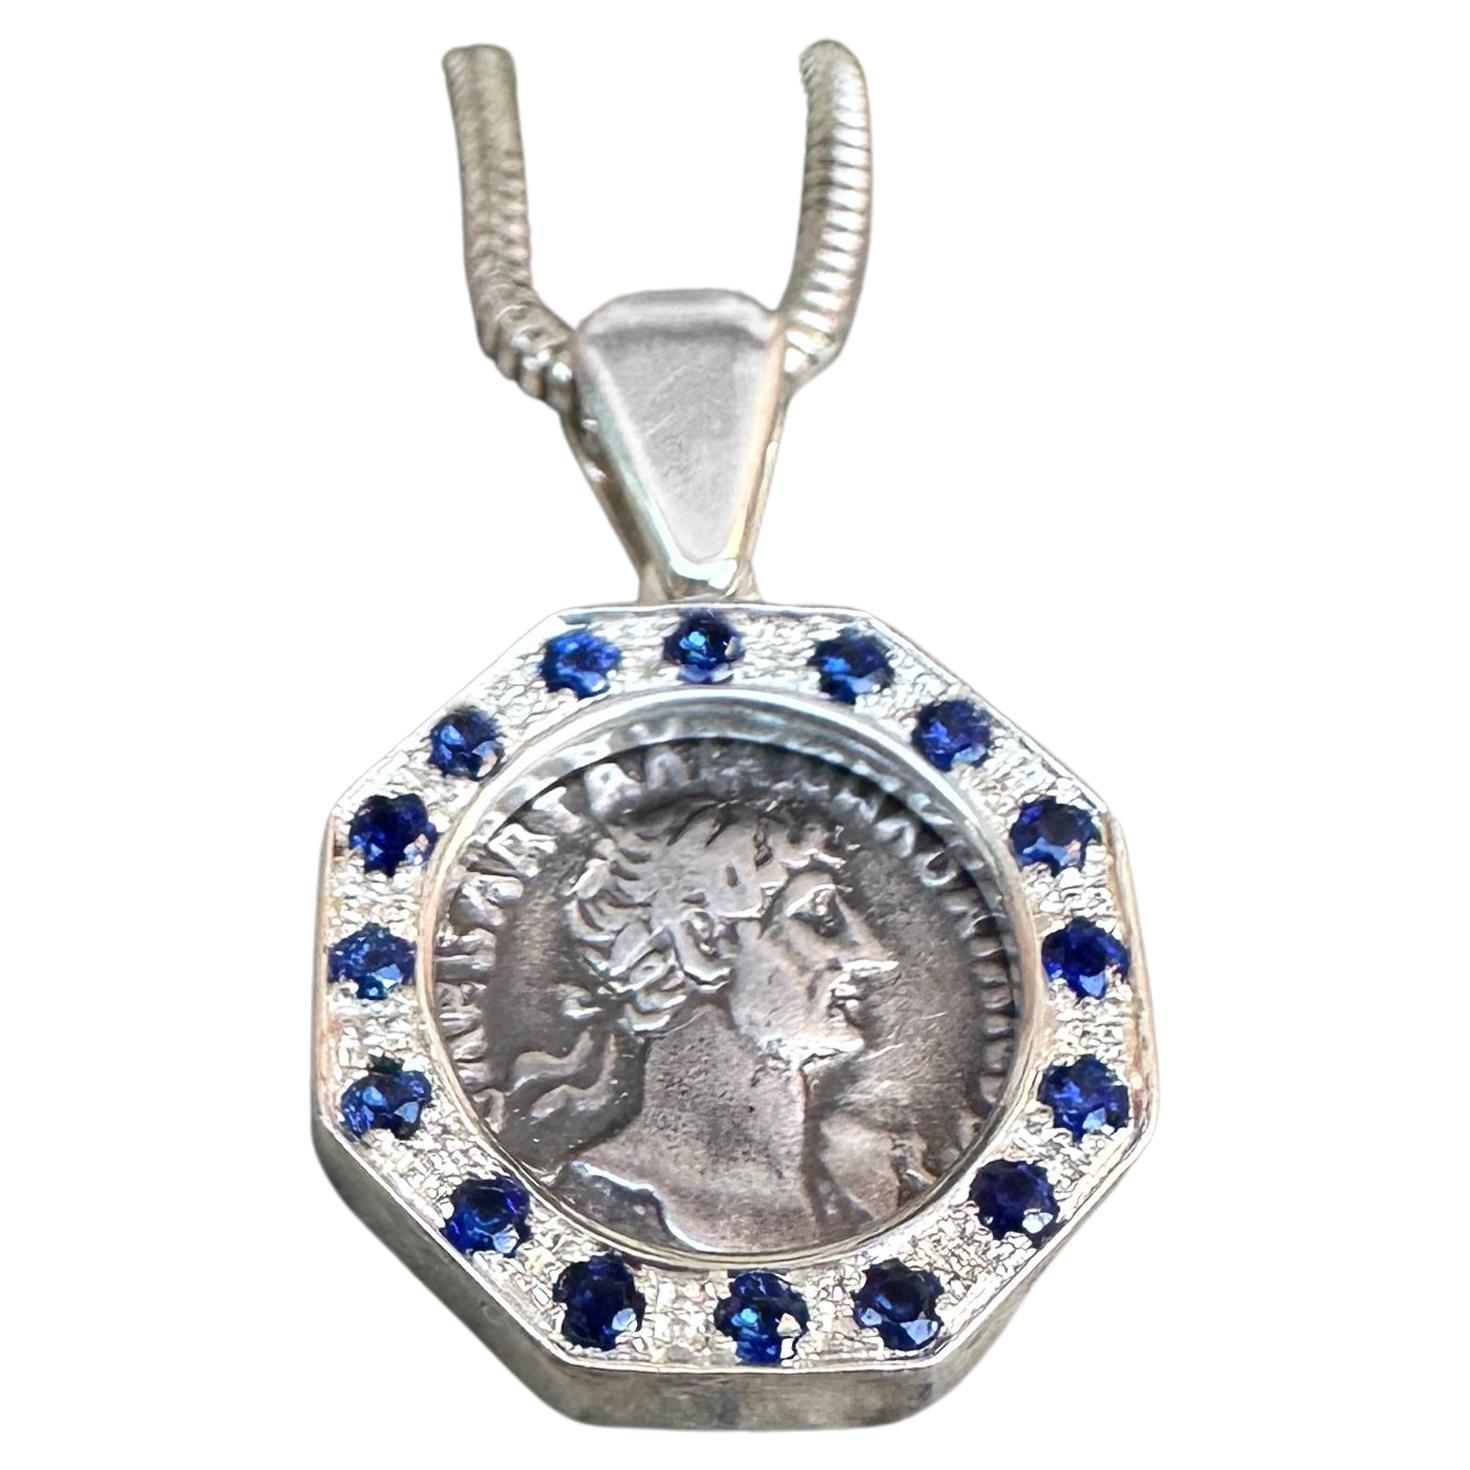 Ancient Roman Coin 2nd Cent. AD Pendant w/sapphires depicting Emperor Hadrian For Sale